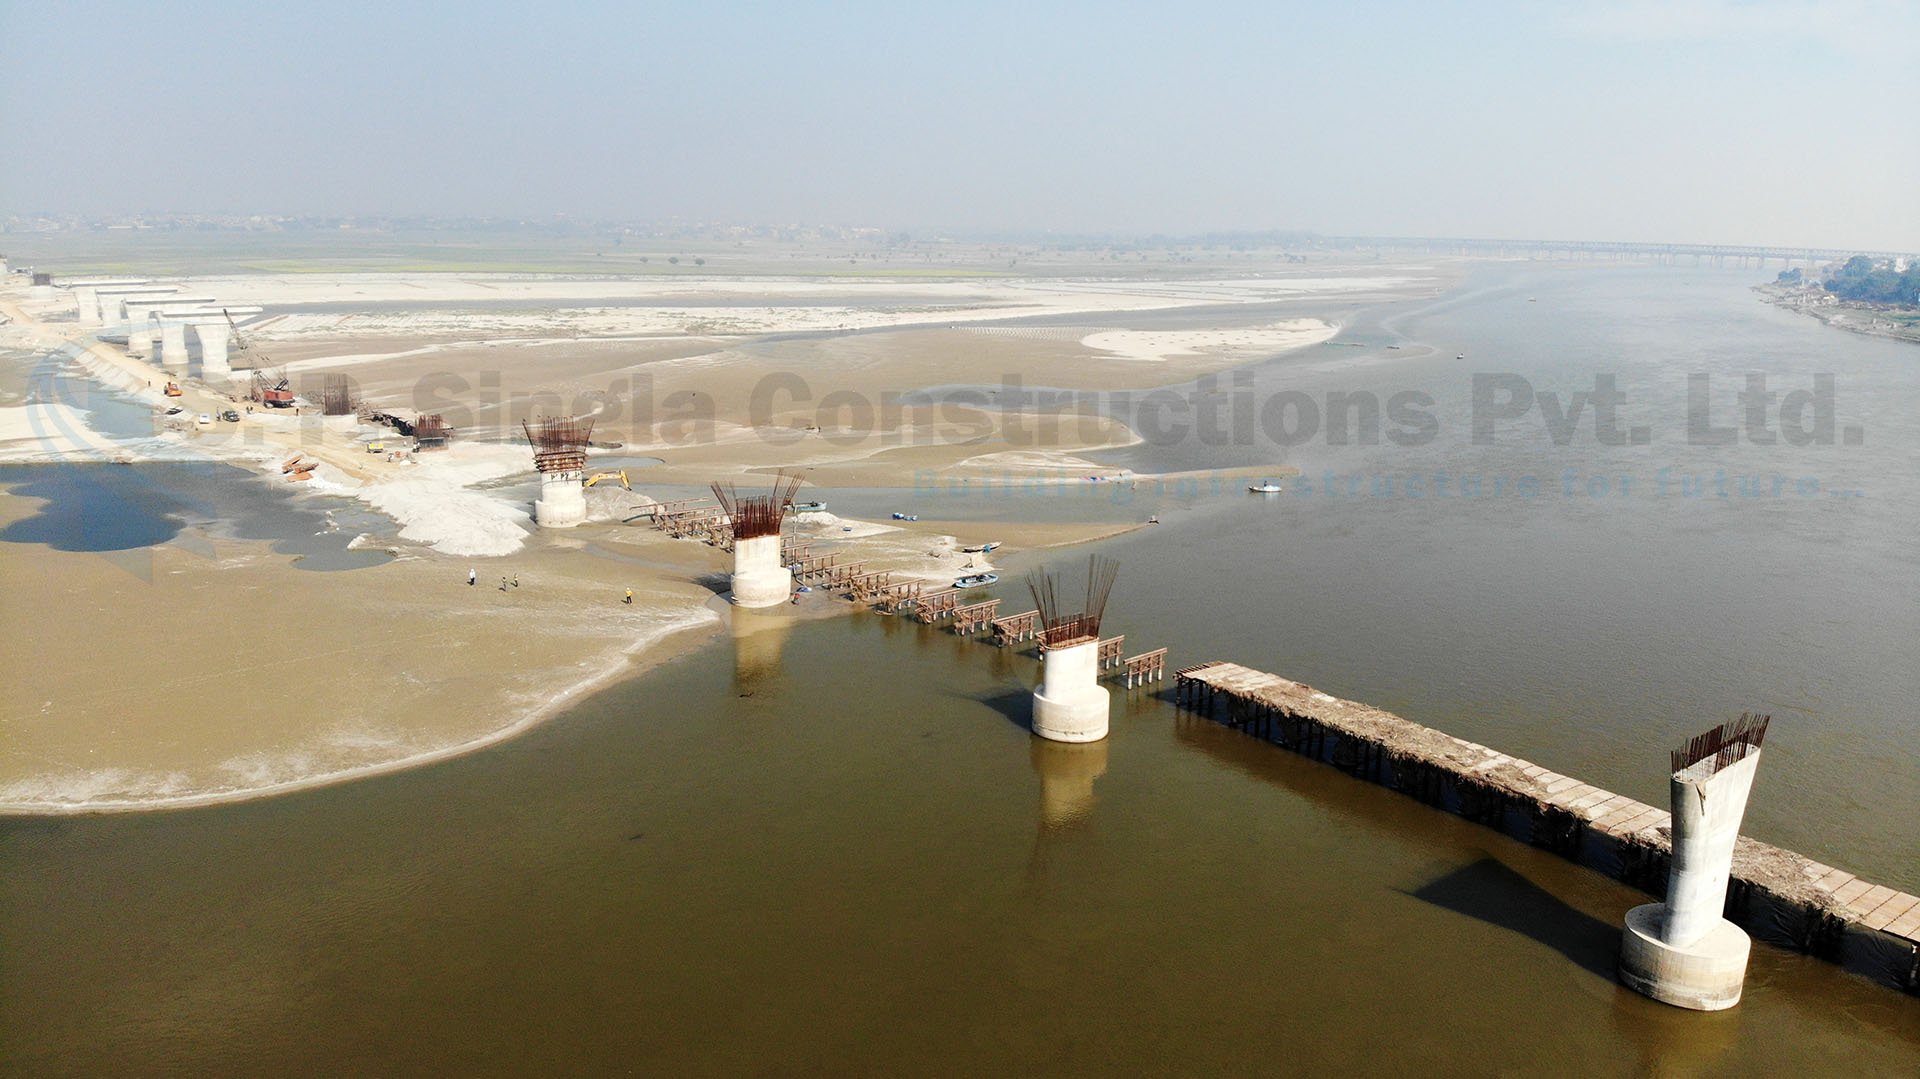 New 6 Lane Bridge including its approaches across the Ganges on NH-96 (New NH-330) at Phaphamau, Prayagraj in the state of UP